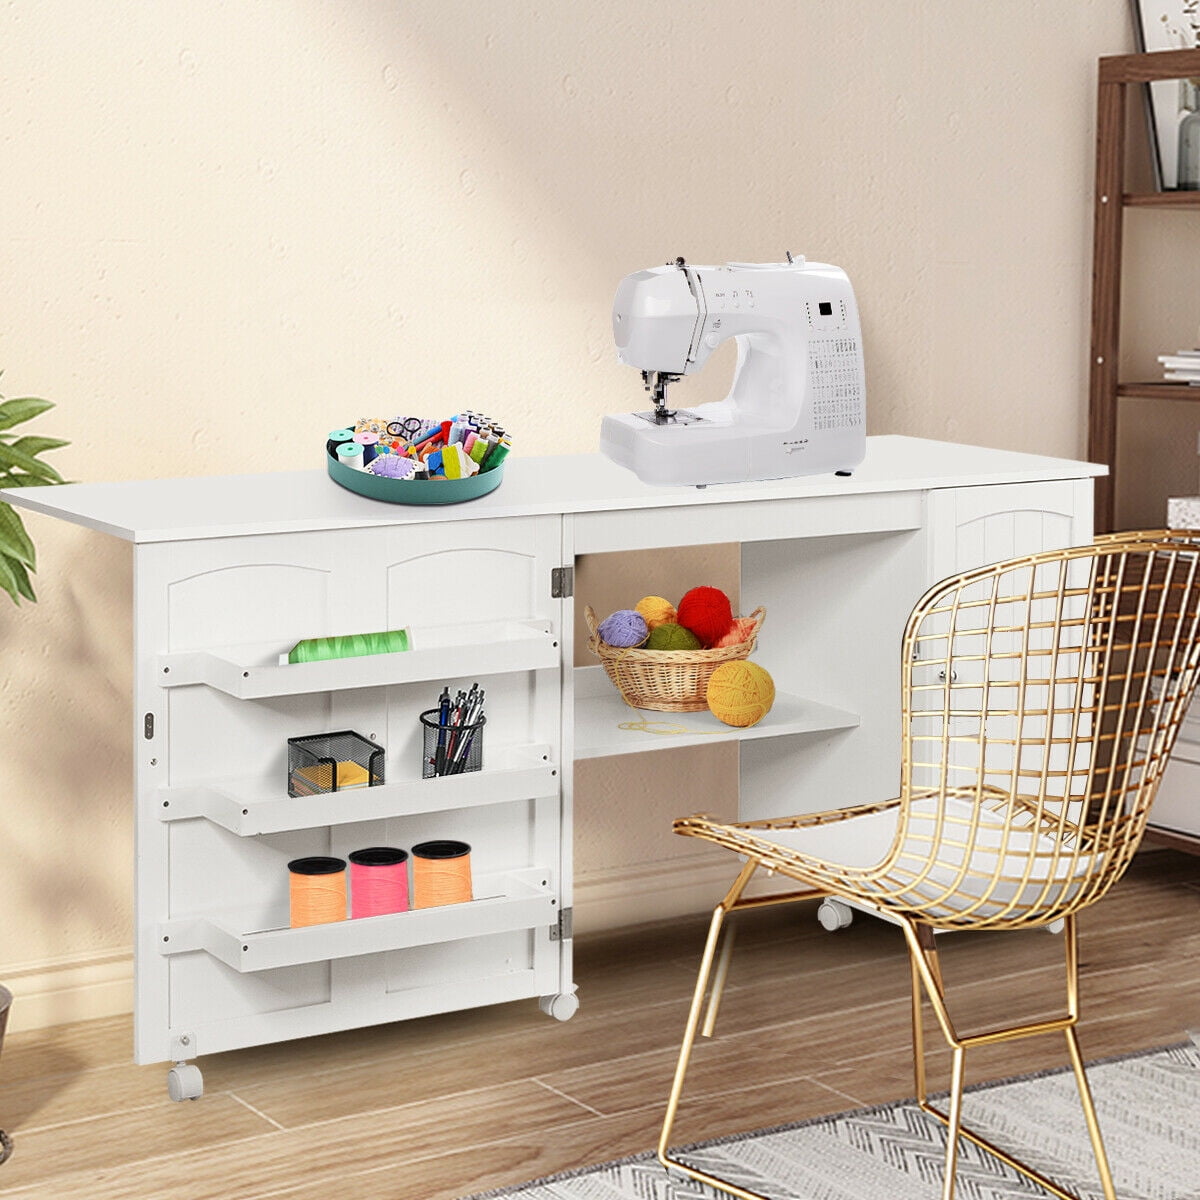 FRESCOLY Folding Sewing Table Shelves Storage Cabinet Craft Cart With Wheels-White, Wayfair